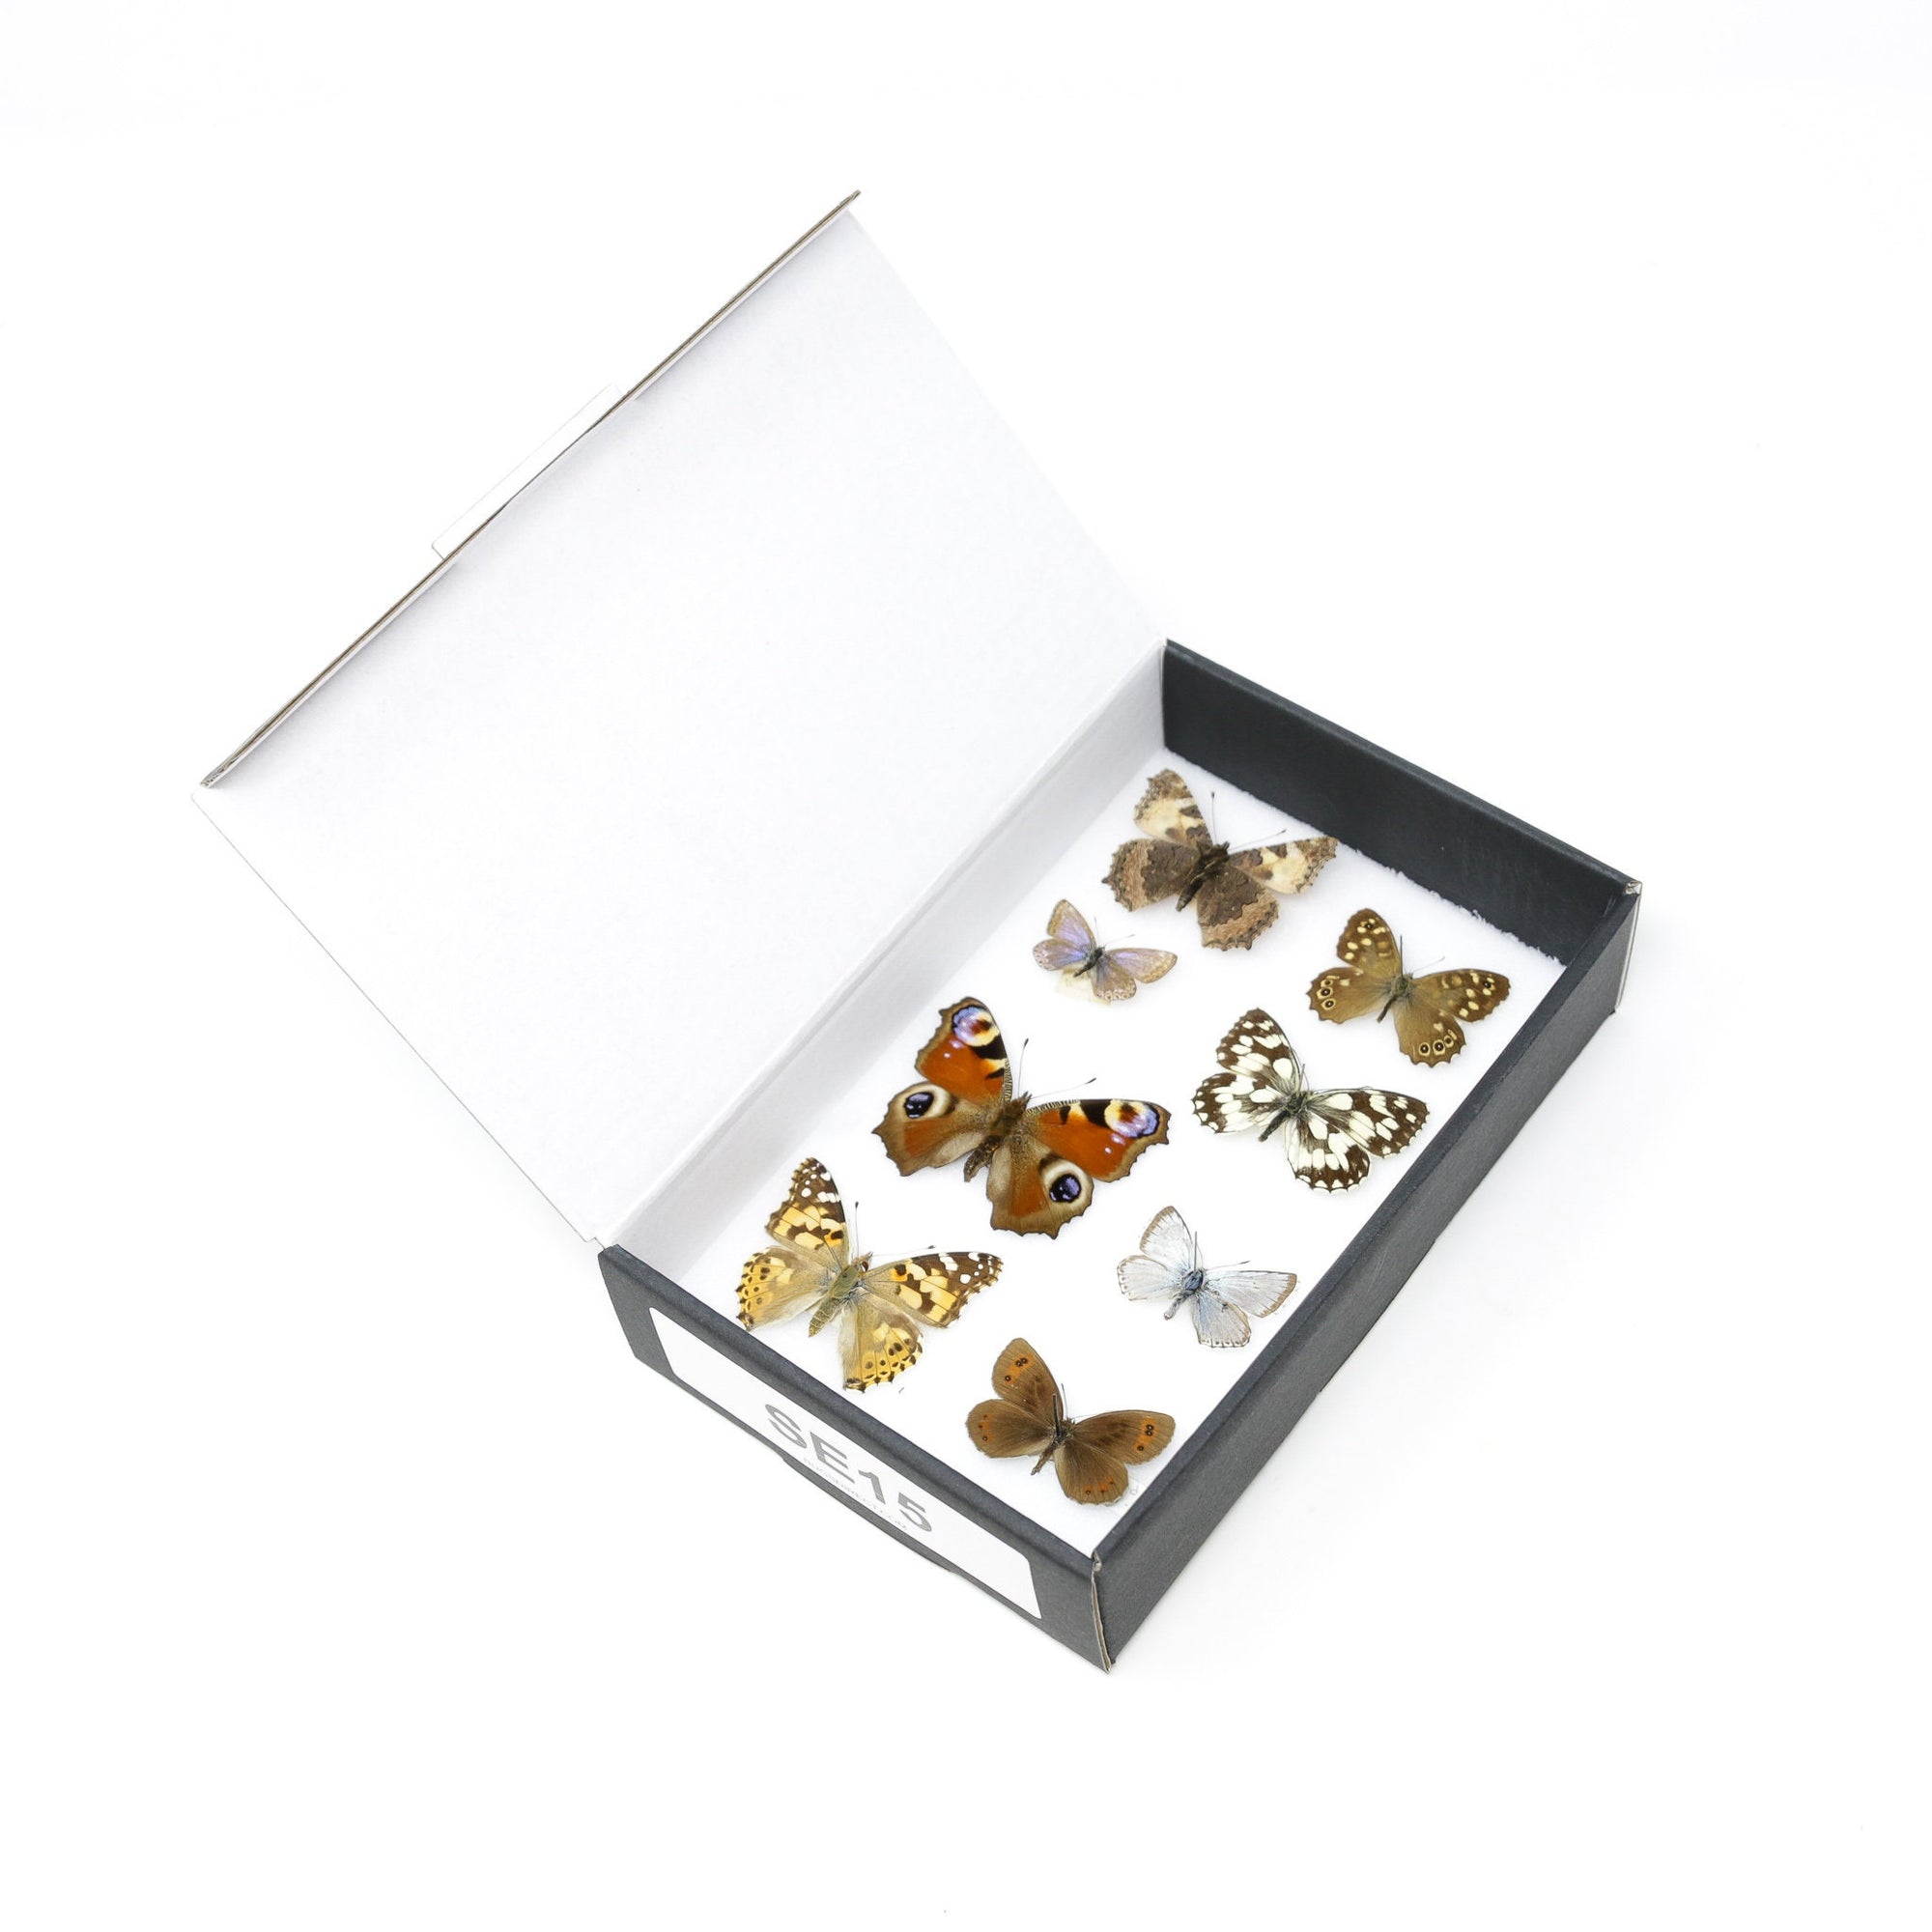 A Collection of Palearctic Butterflies with Scientific Collection Data, A1 Quality, Entomology, Real Lepidoptera Specimens #SE15